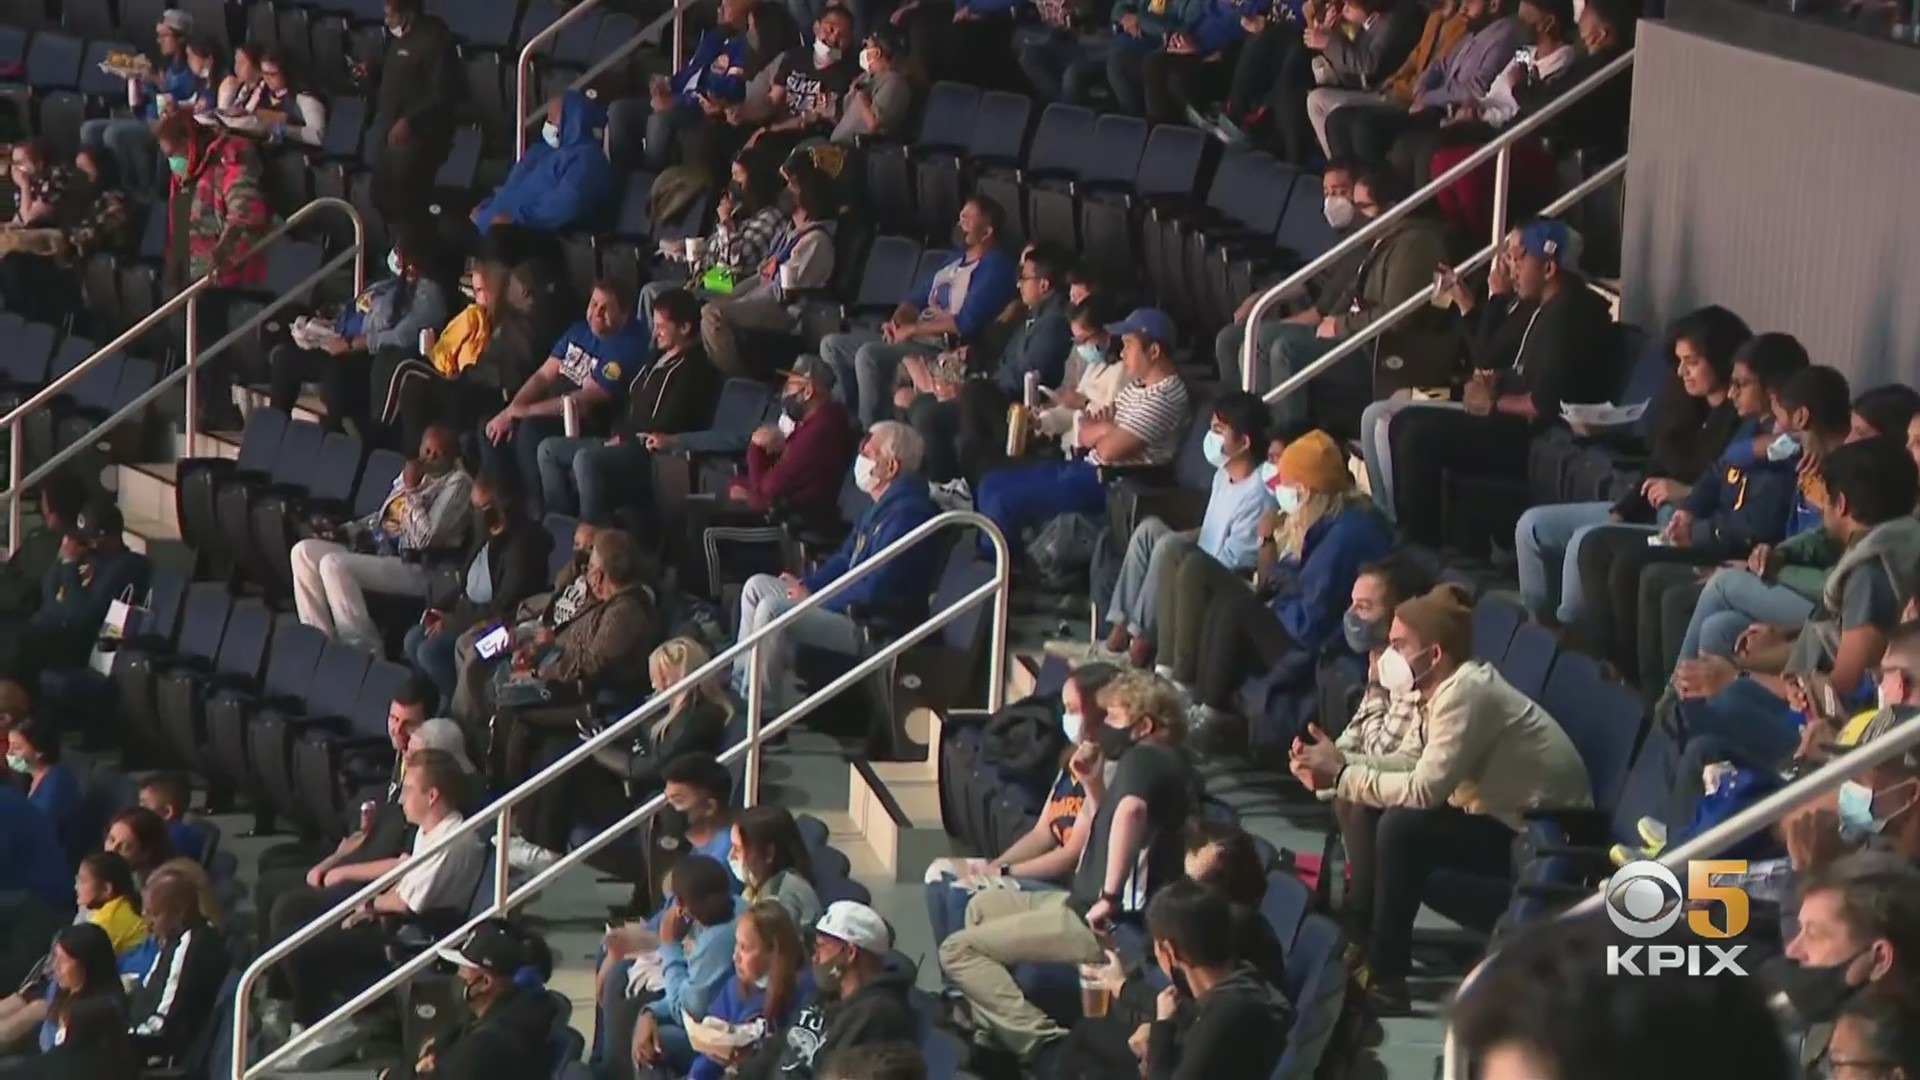 Fans at Chase Center to watch the Golden State Warriors vs. Denver Nuggets preseason game on October 6, 2021. (CBS)